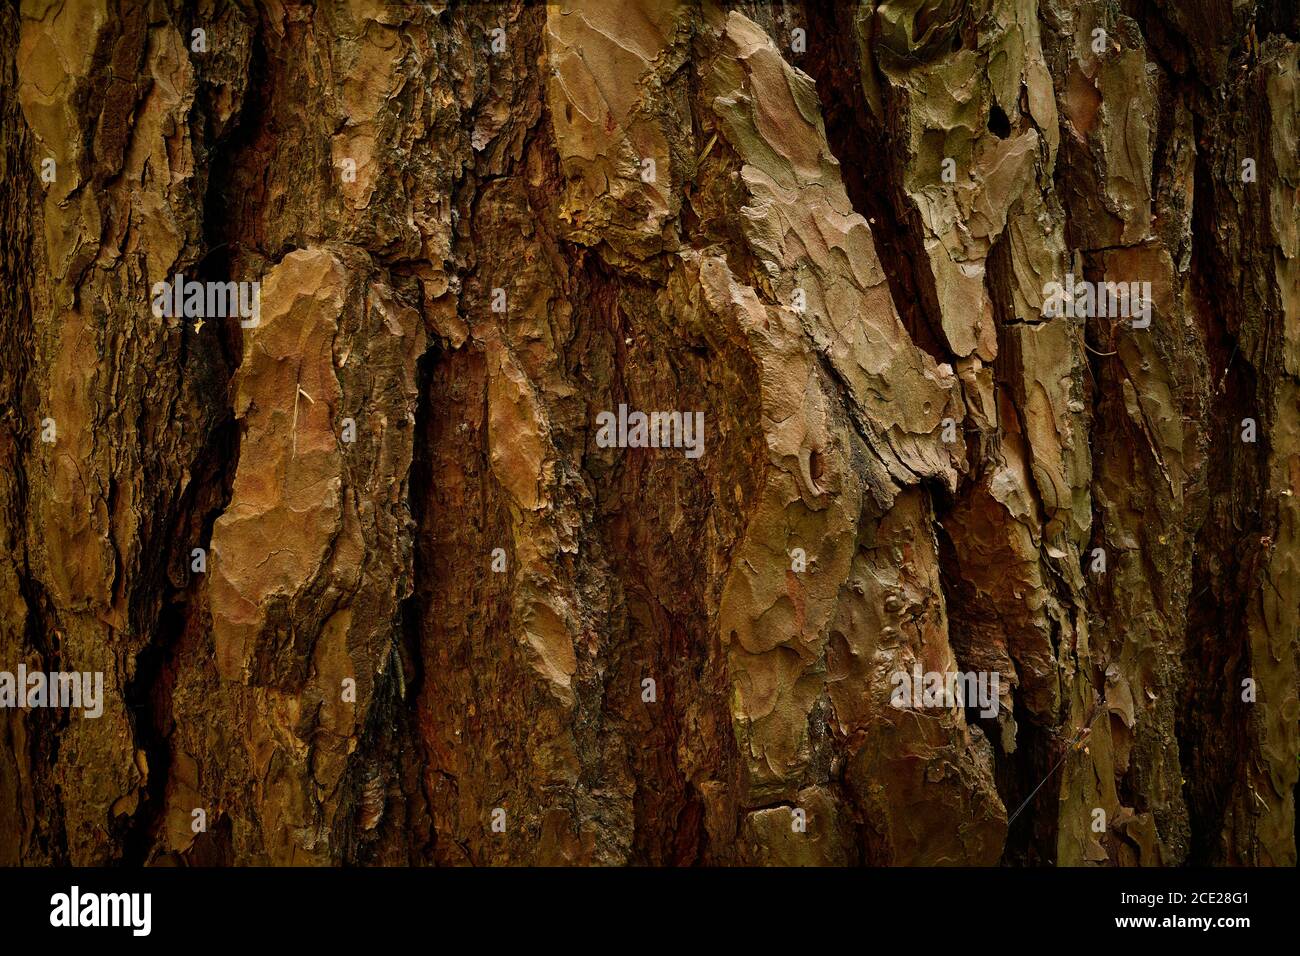 Textured rind of age pine tree. Dry Pinus sylvestris skin. Closeup image. A rough, streaked, cracked, coarse, bumpy bark of aged pine tree. Stock Photo